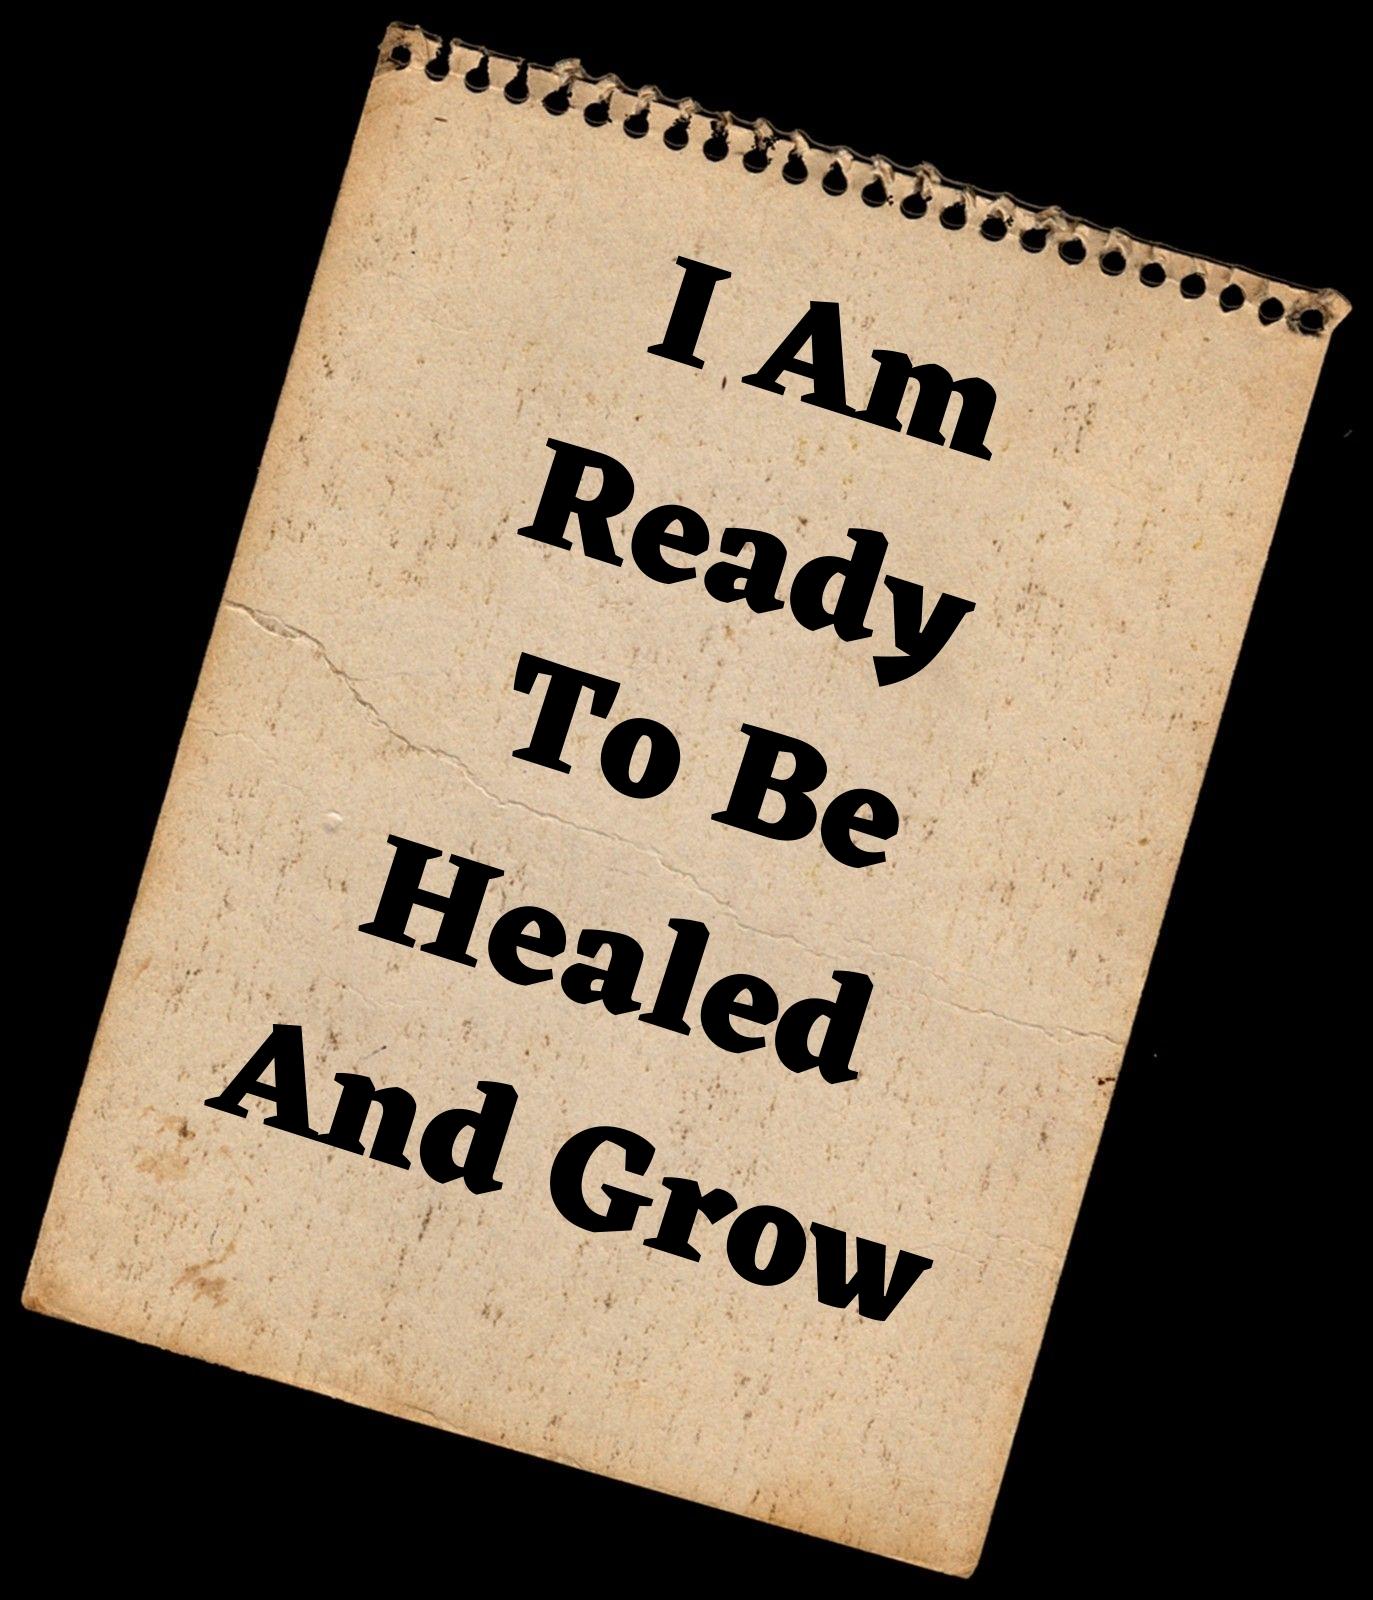  I am ready to be healed and grow.